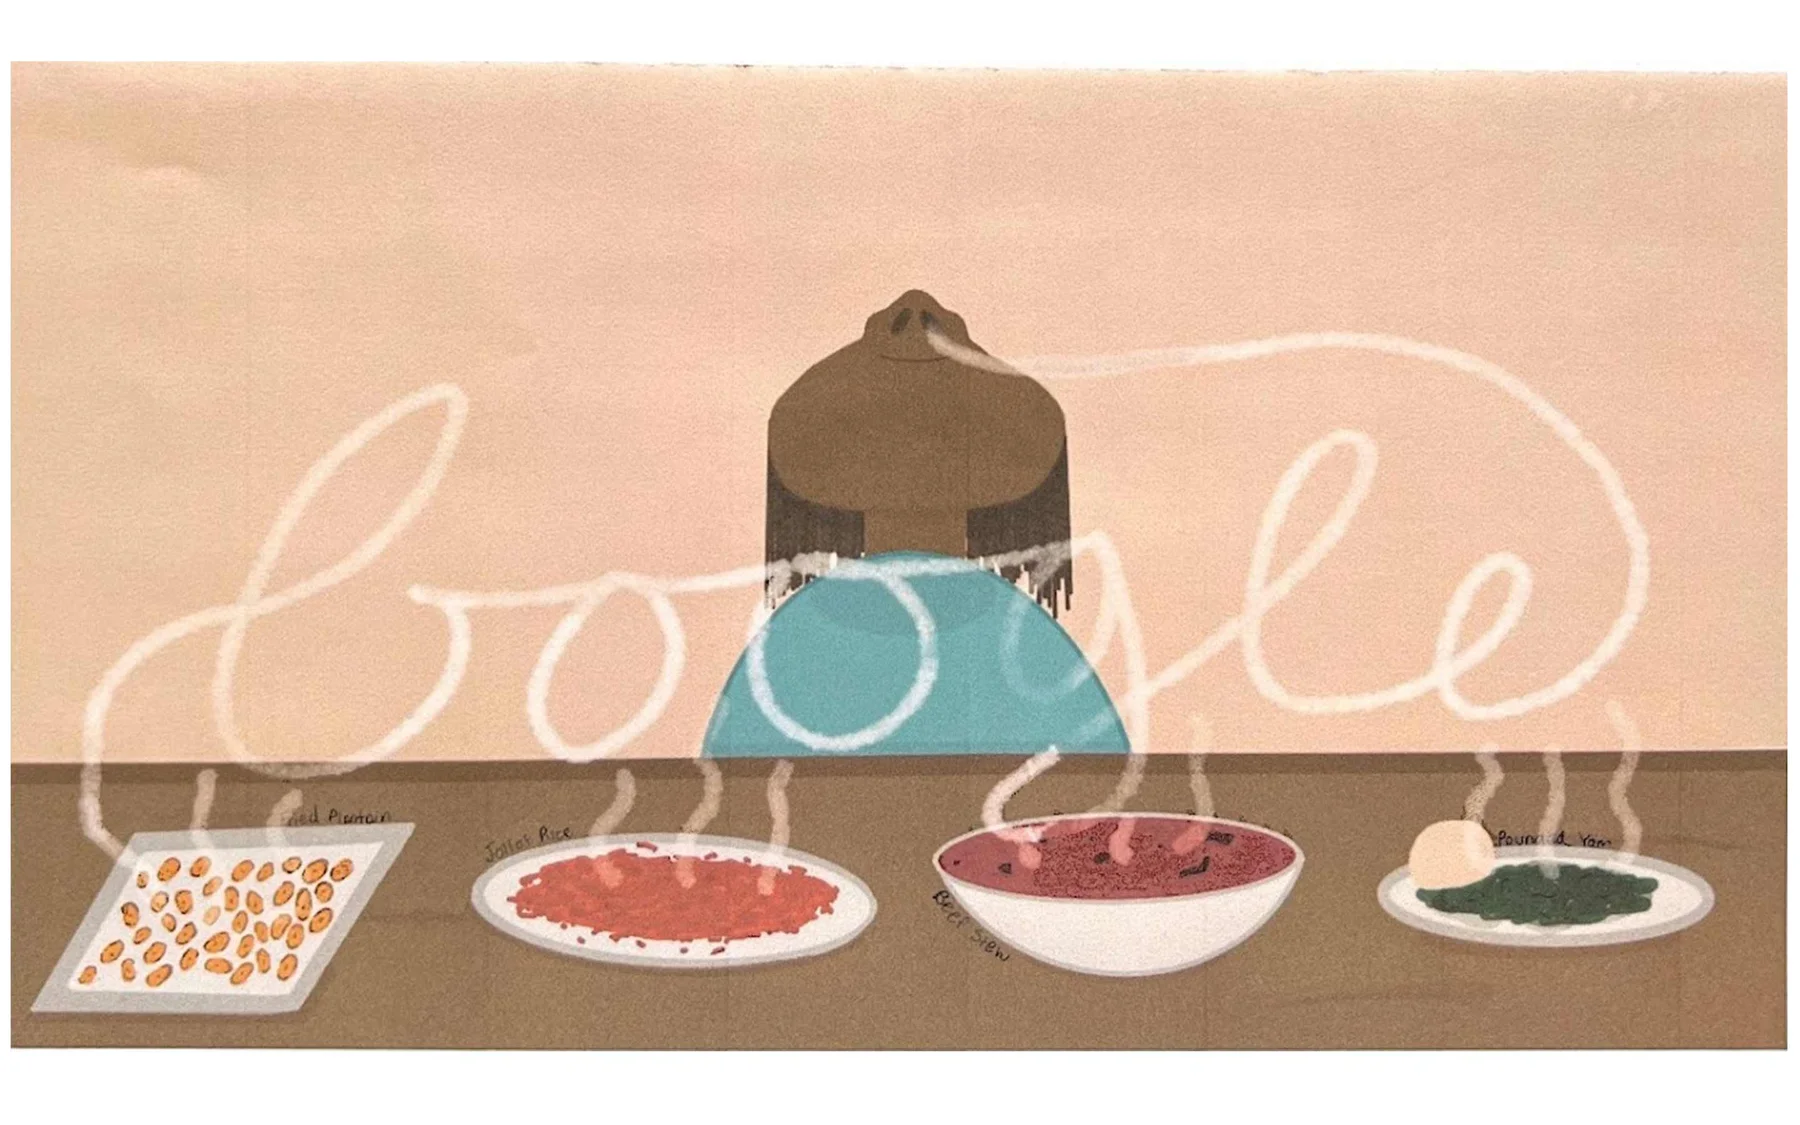 A drawing of a young girl smelling different dishes including Jollof rice, beef stew, plantains and pounded yam. “Google” is spelled out by the smoke plumes coming from the food.